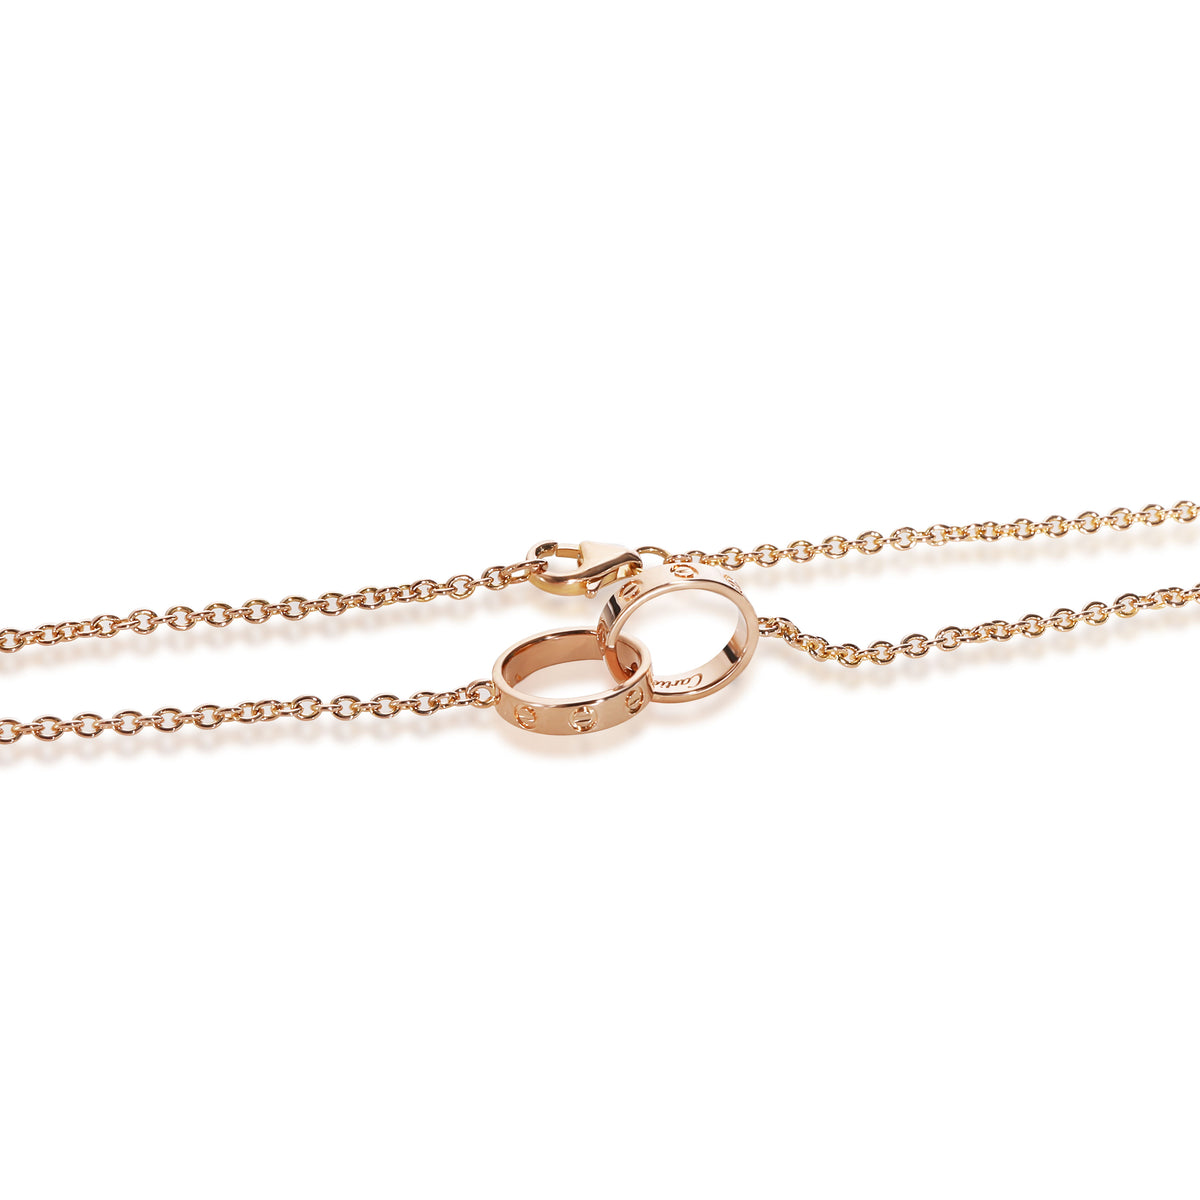 Cartier Love Necklace in 18K Rose Gold